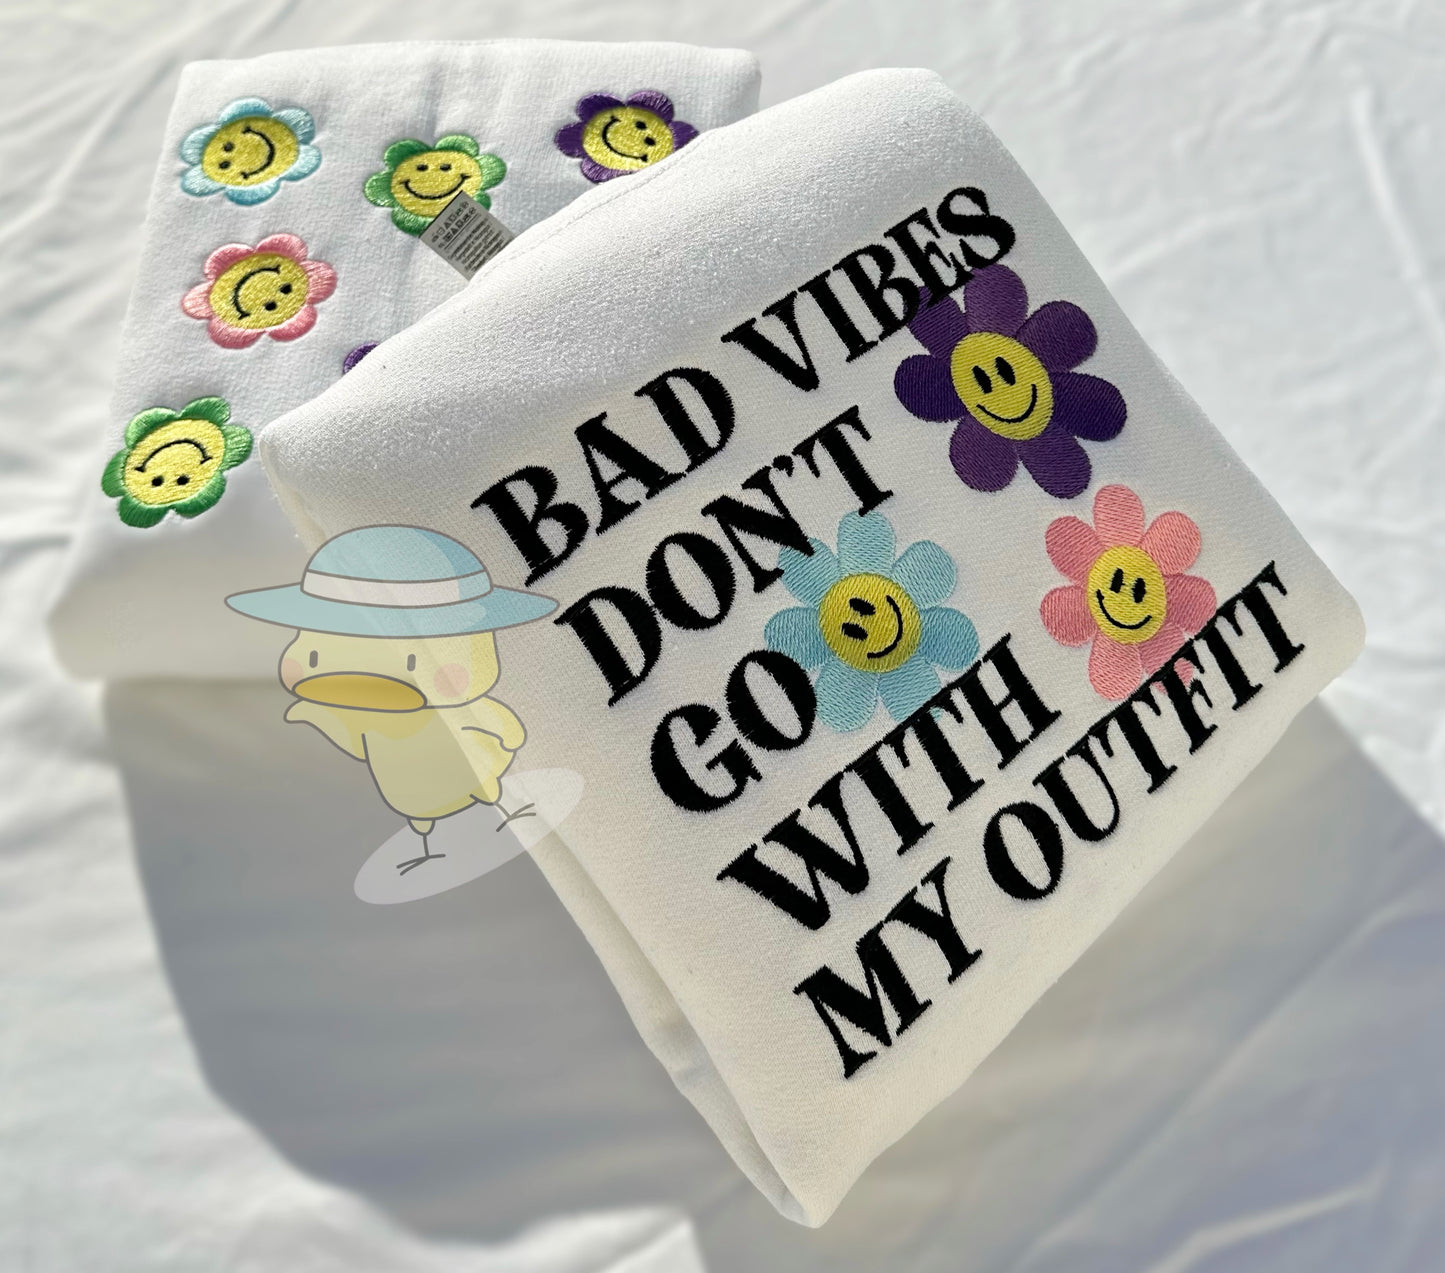 Bad Vibes Don’t Go With My Outfit 8x10 Embroidery Crewneck Sweatshirt